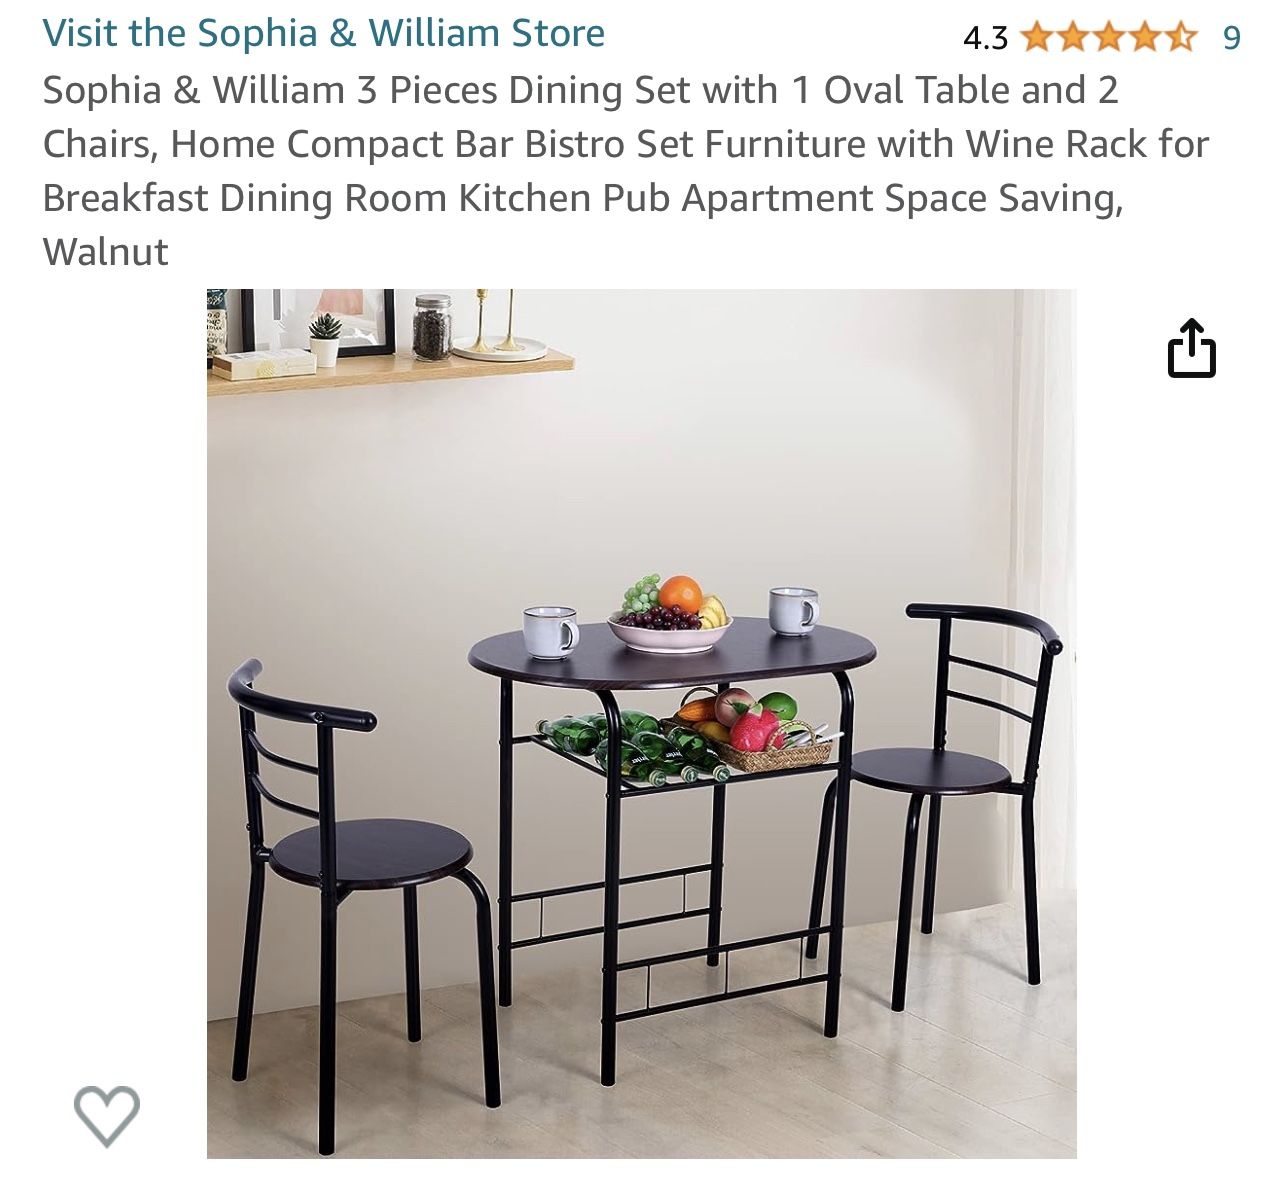 Sophia & William 3 Pieces Dining Set with 1 Oval Table and 2 Chairs, Home Compact Bar Bistro Set Furniture with Wine Rack for Breakfast Dining Room Ki